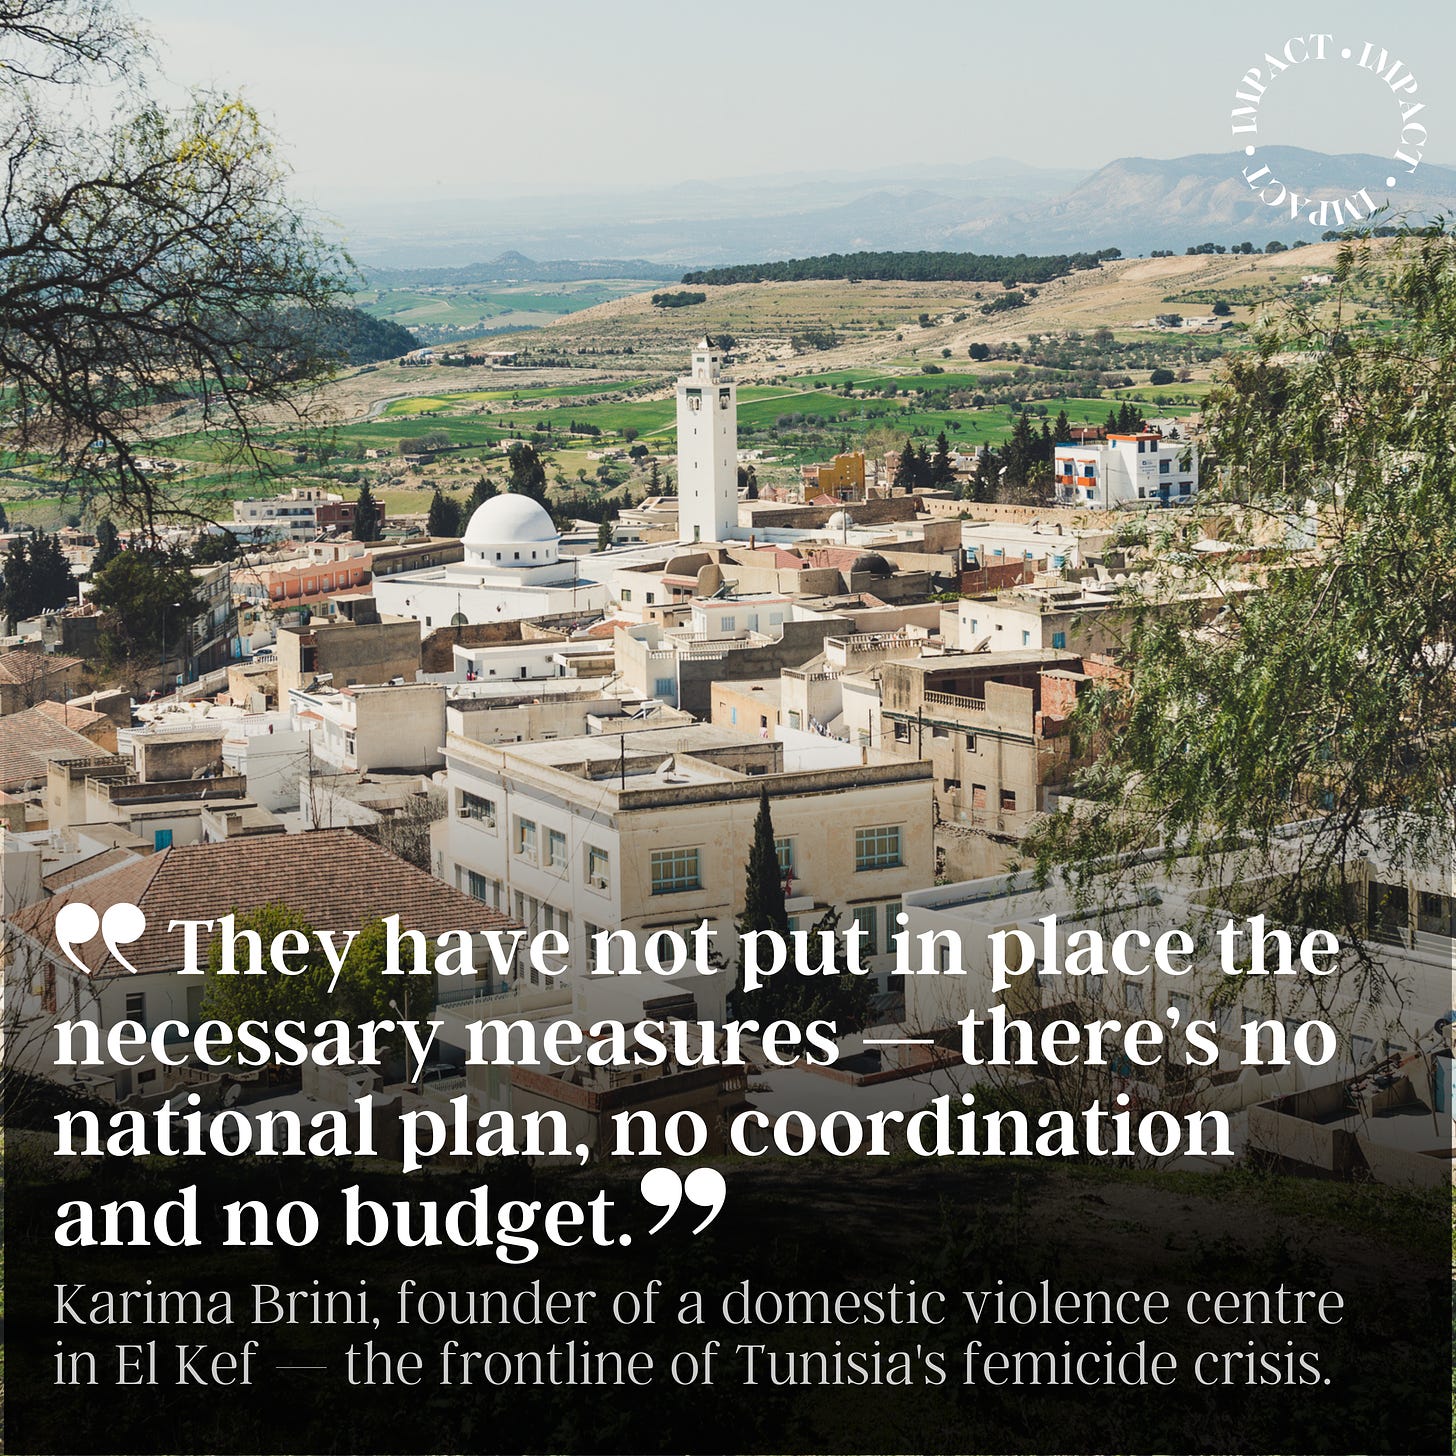 photo of El Kef, Tunisia. With text over image: They have not put in place the necessary measures — there’s no national plan, no coordination and no budget." Karima Brini, founder of a domestic violence centre in El Kef — the frontline of Tunisia's femicide crisis.